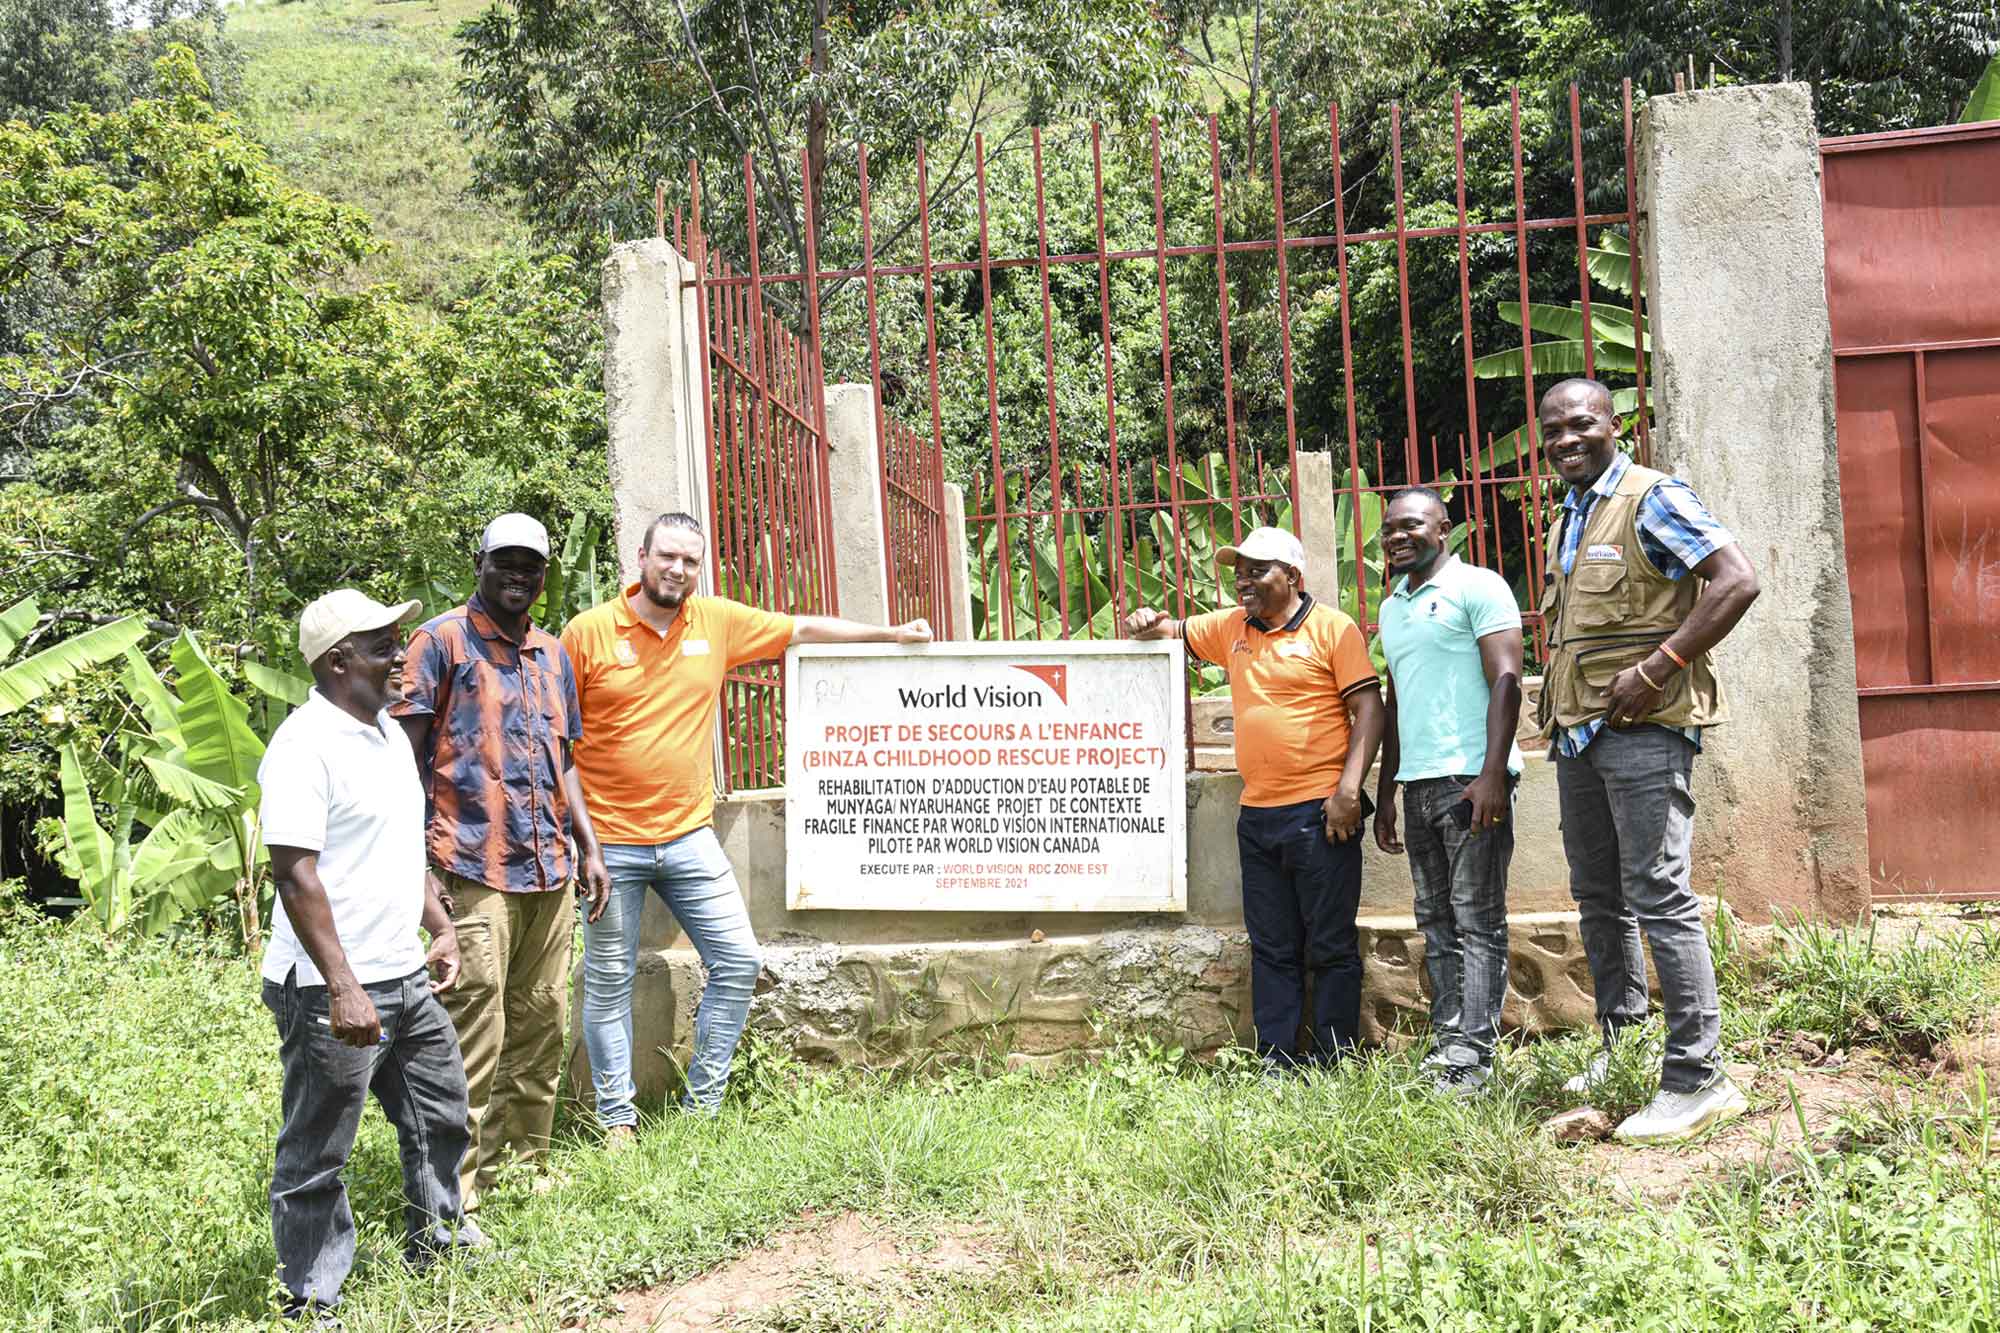 A group of men smile while standing together outdoors in front of a World Vision property sign.